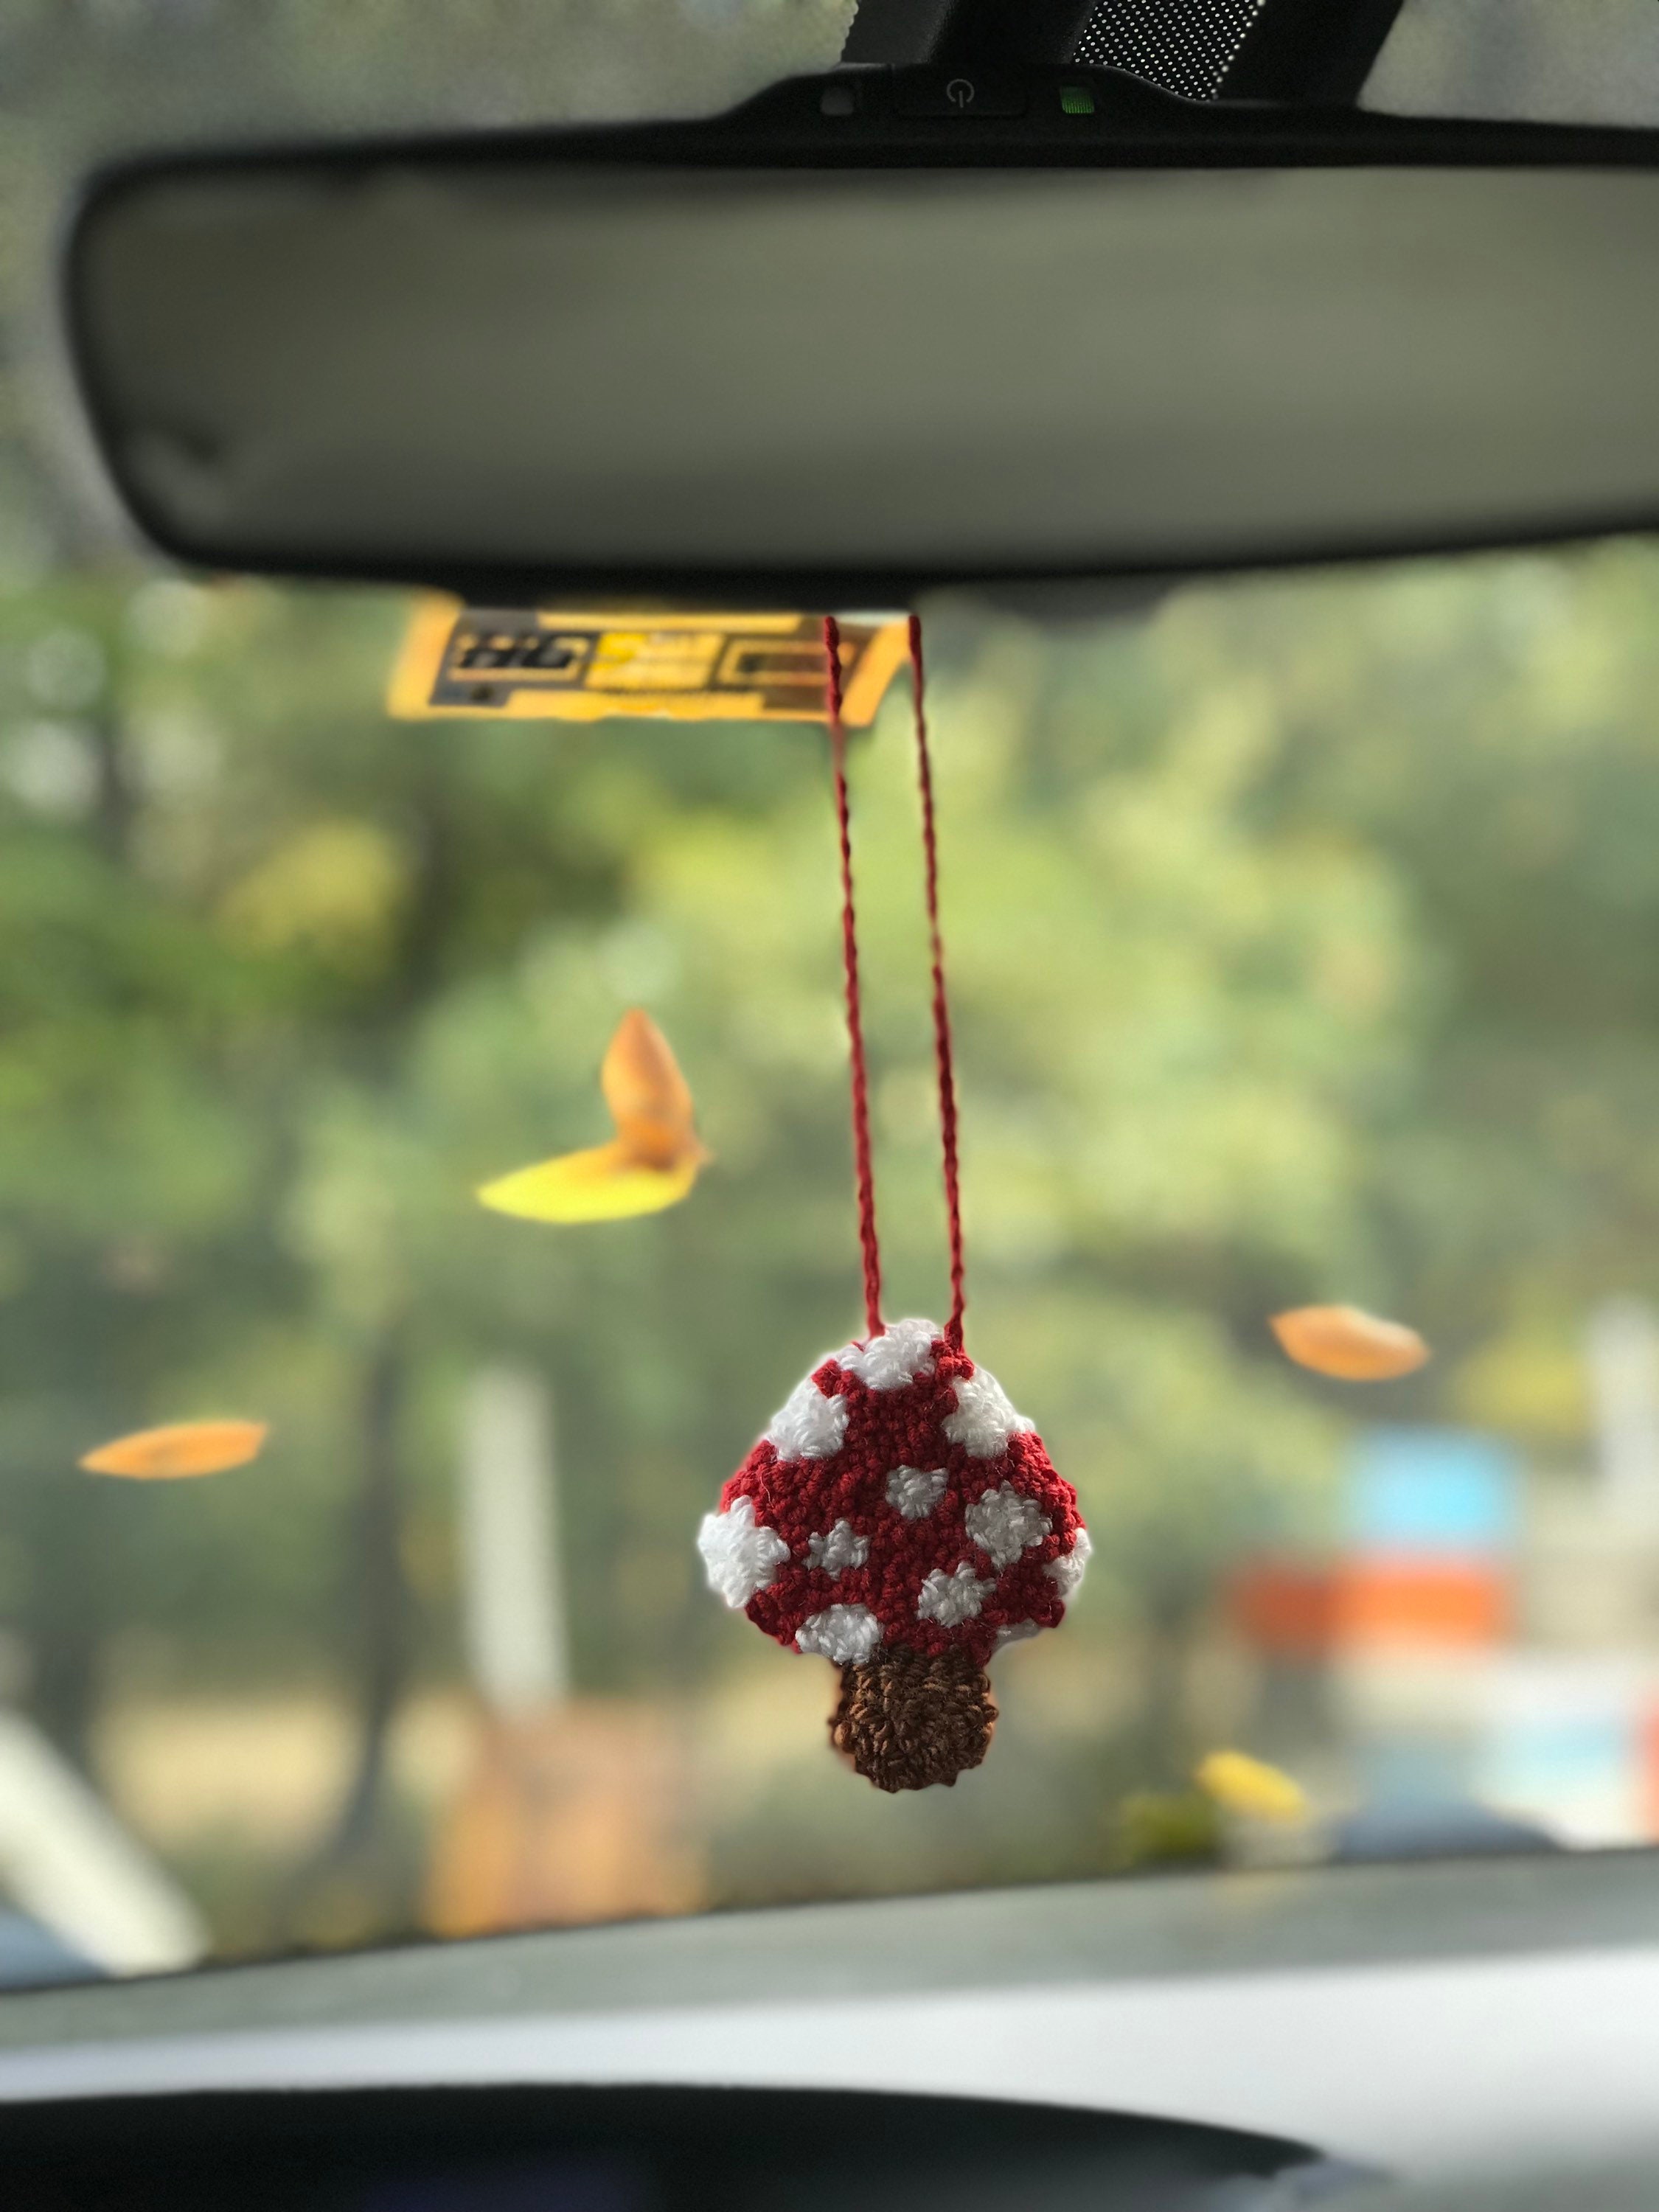 EVAAM® Christmas Car Rearview Mirror Hanging Decorations